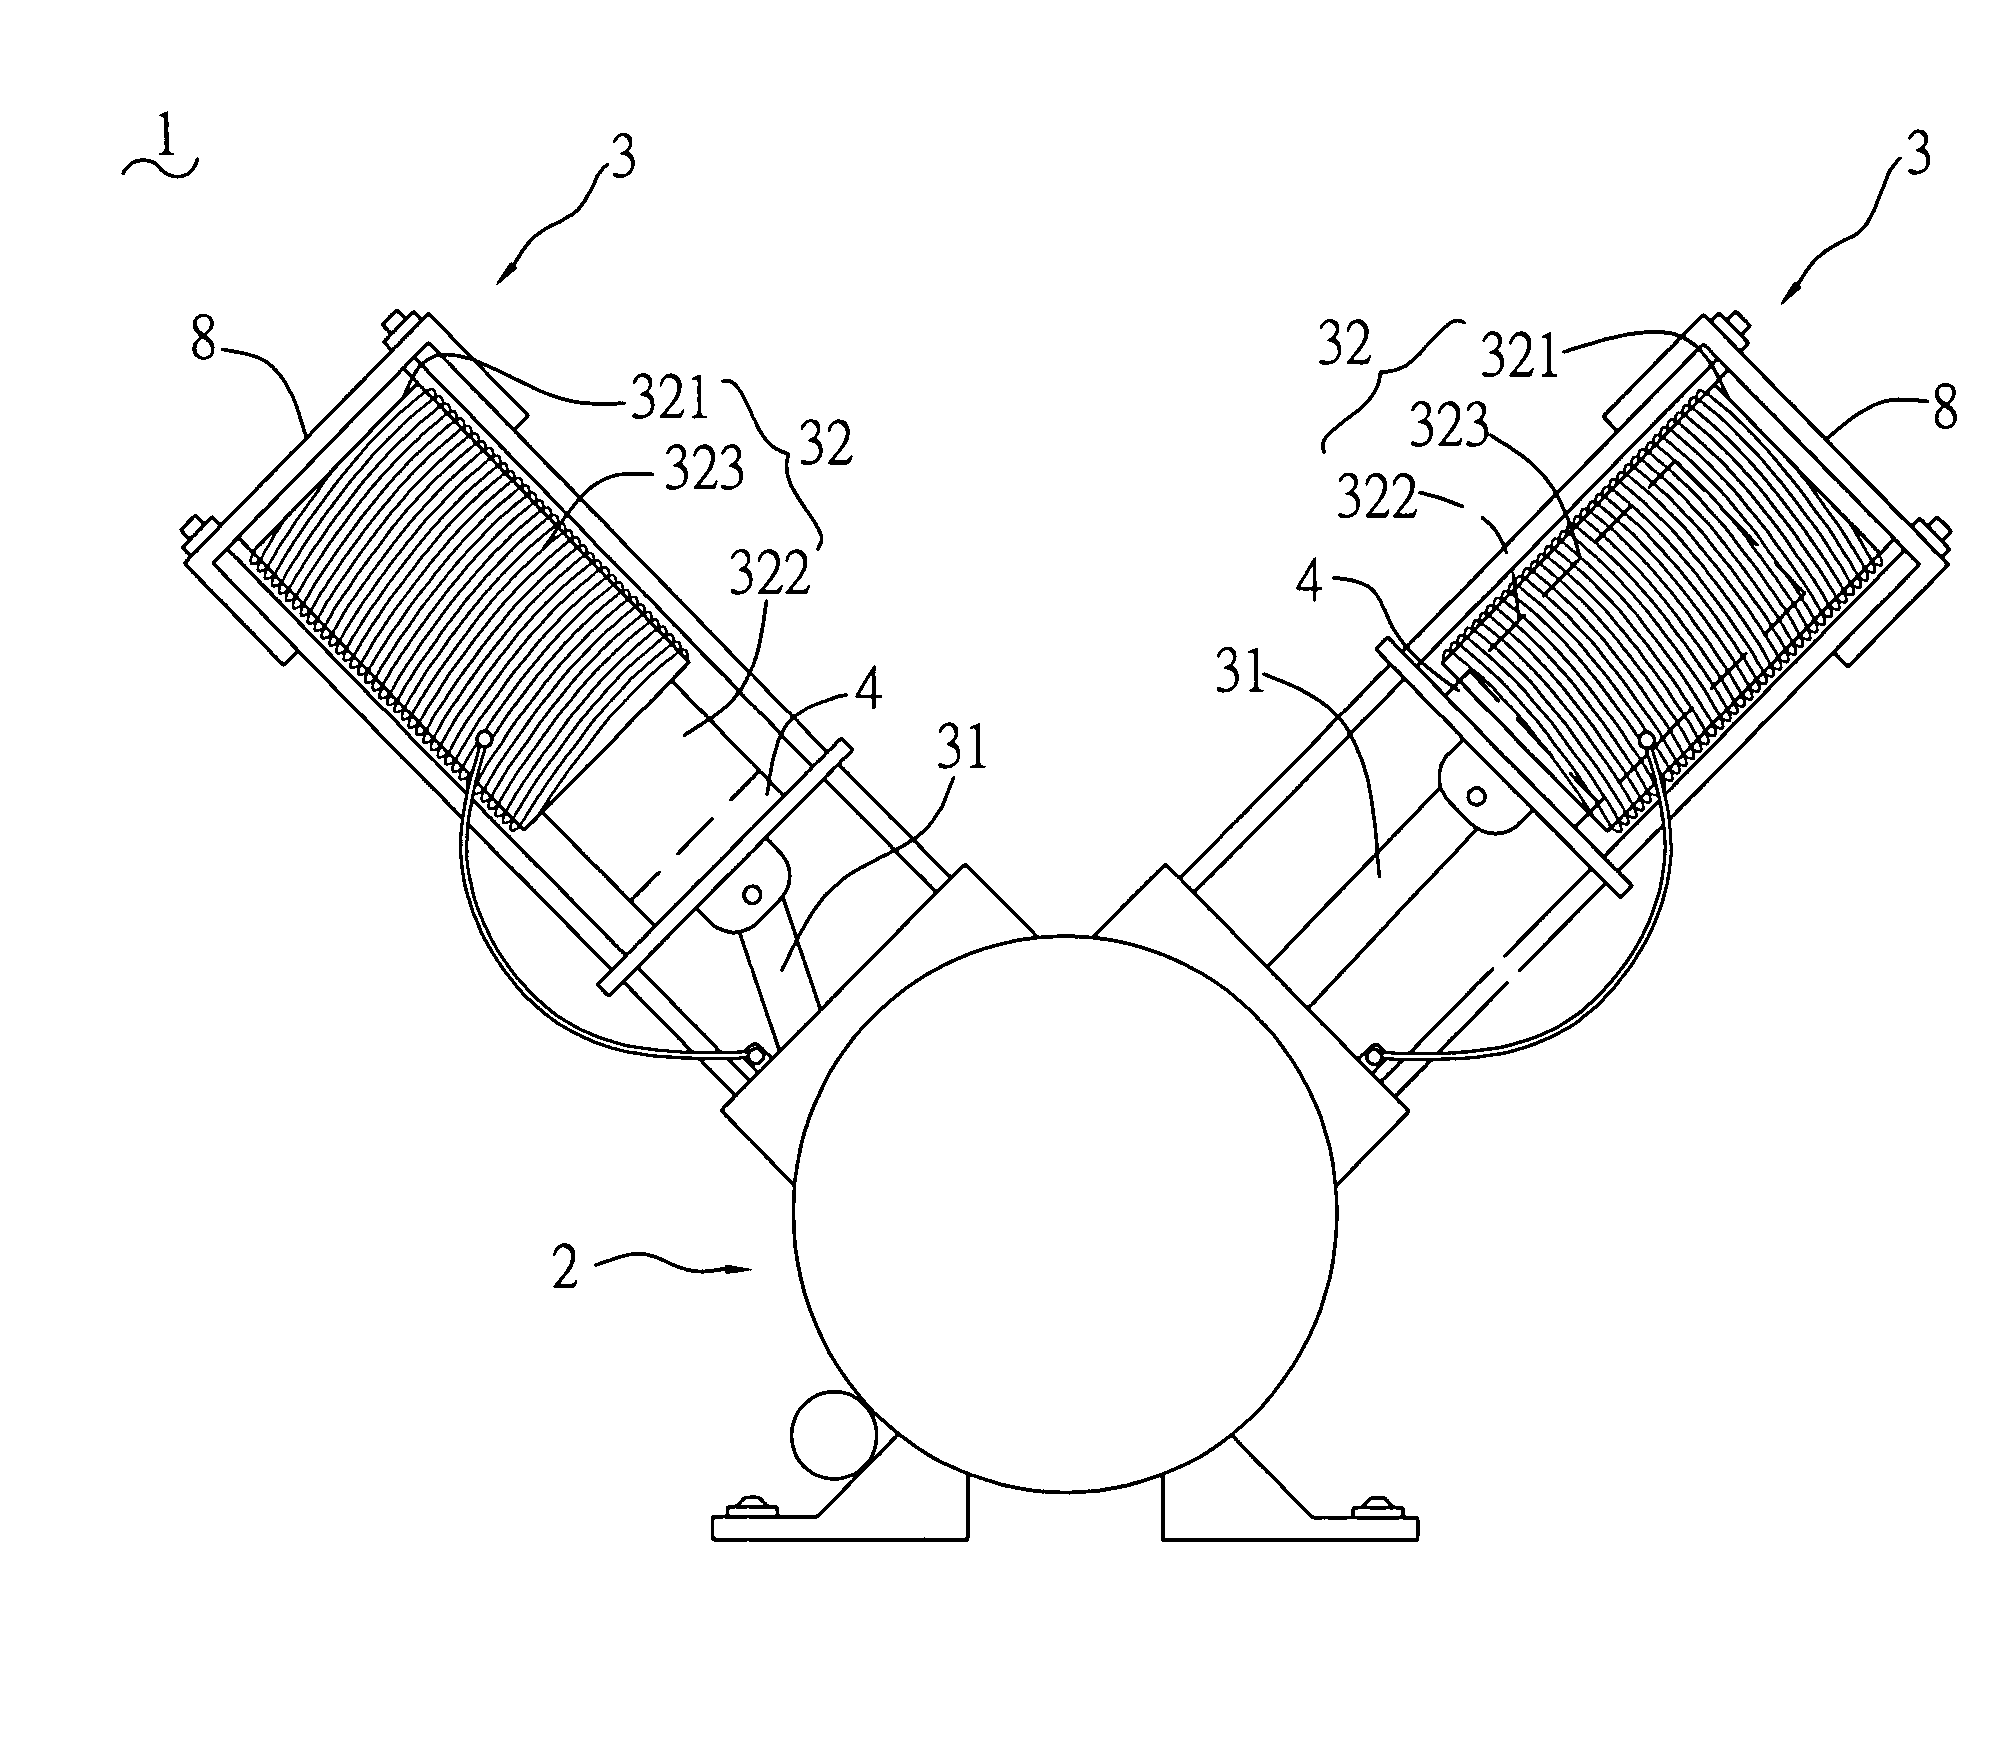 Electromagnetic power transferring system